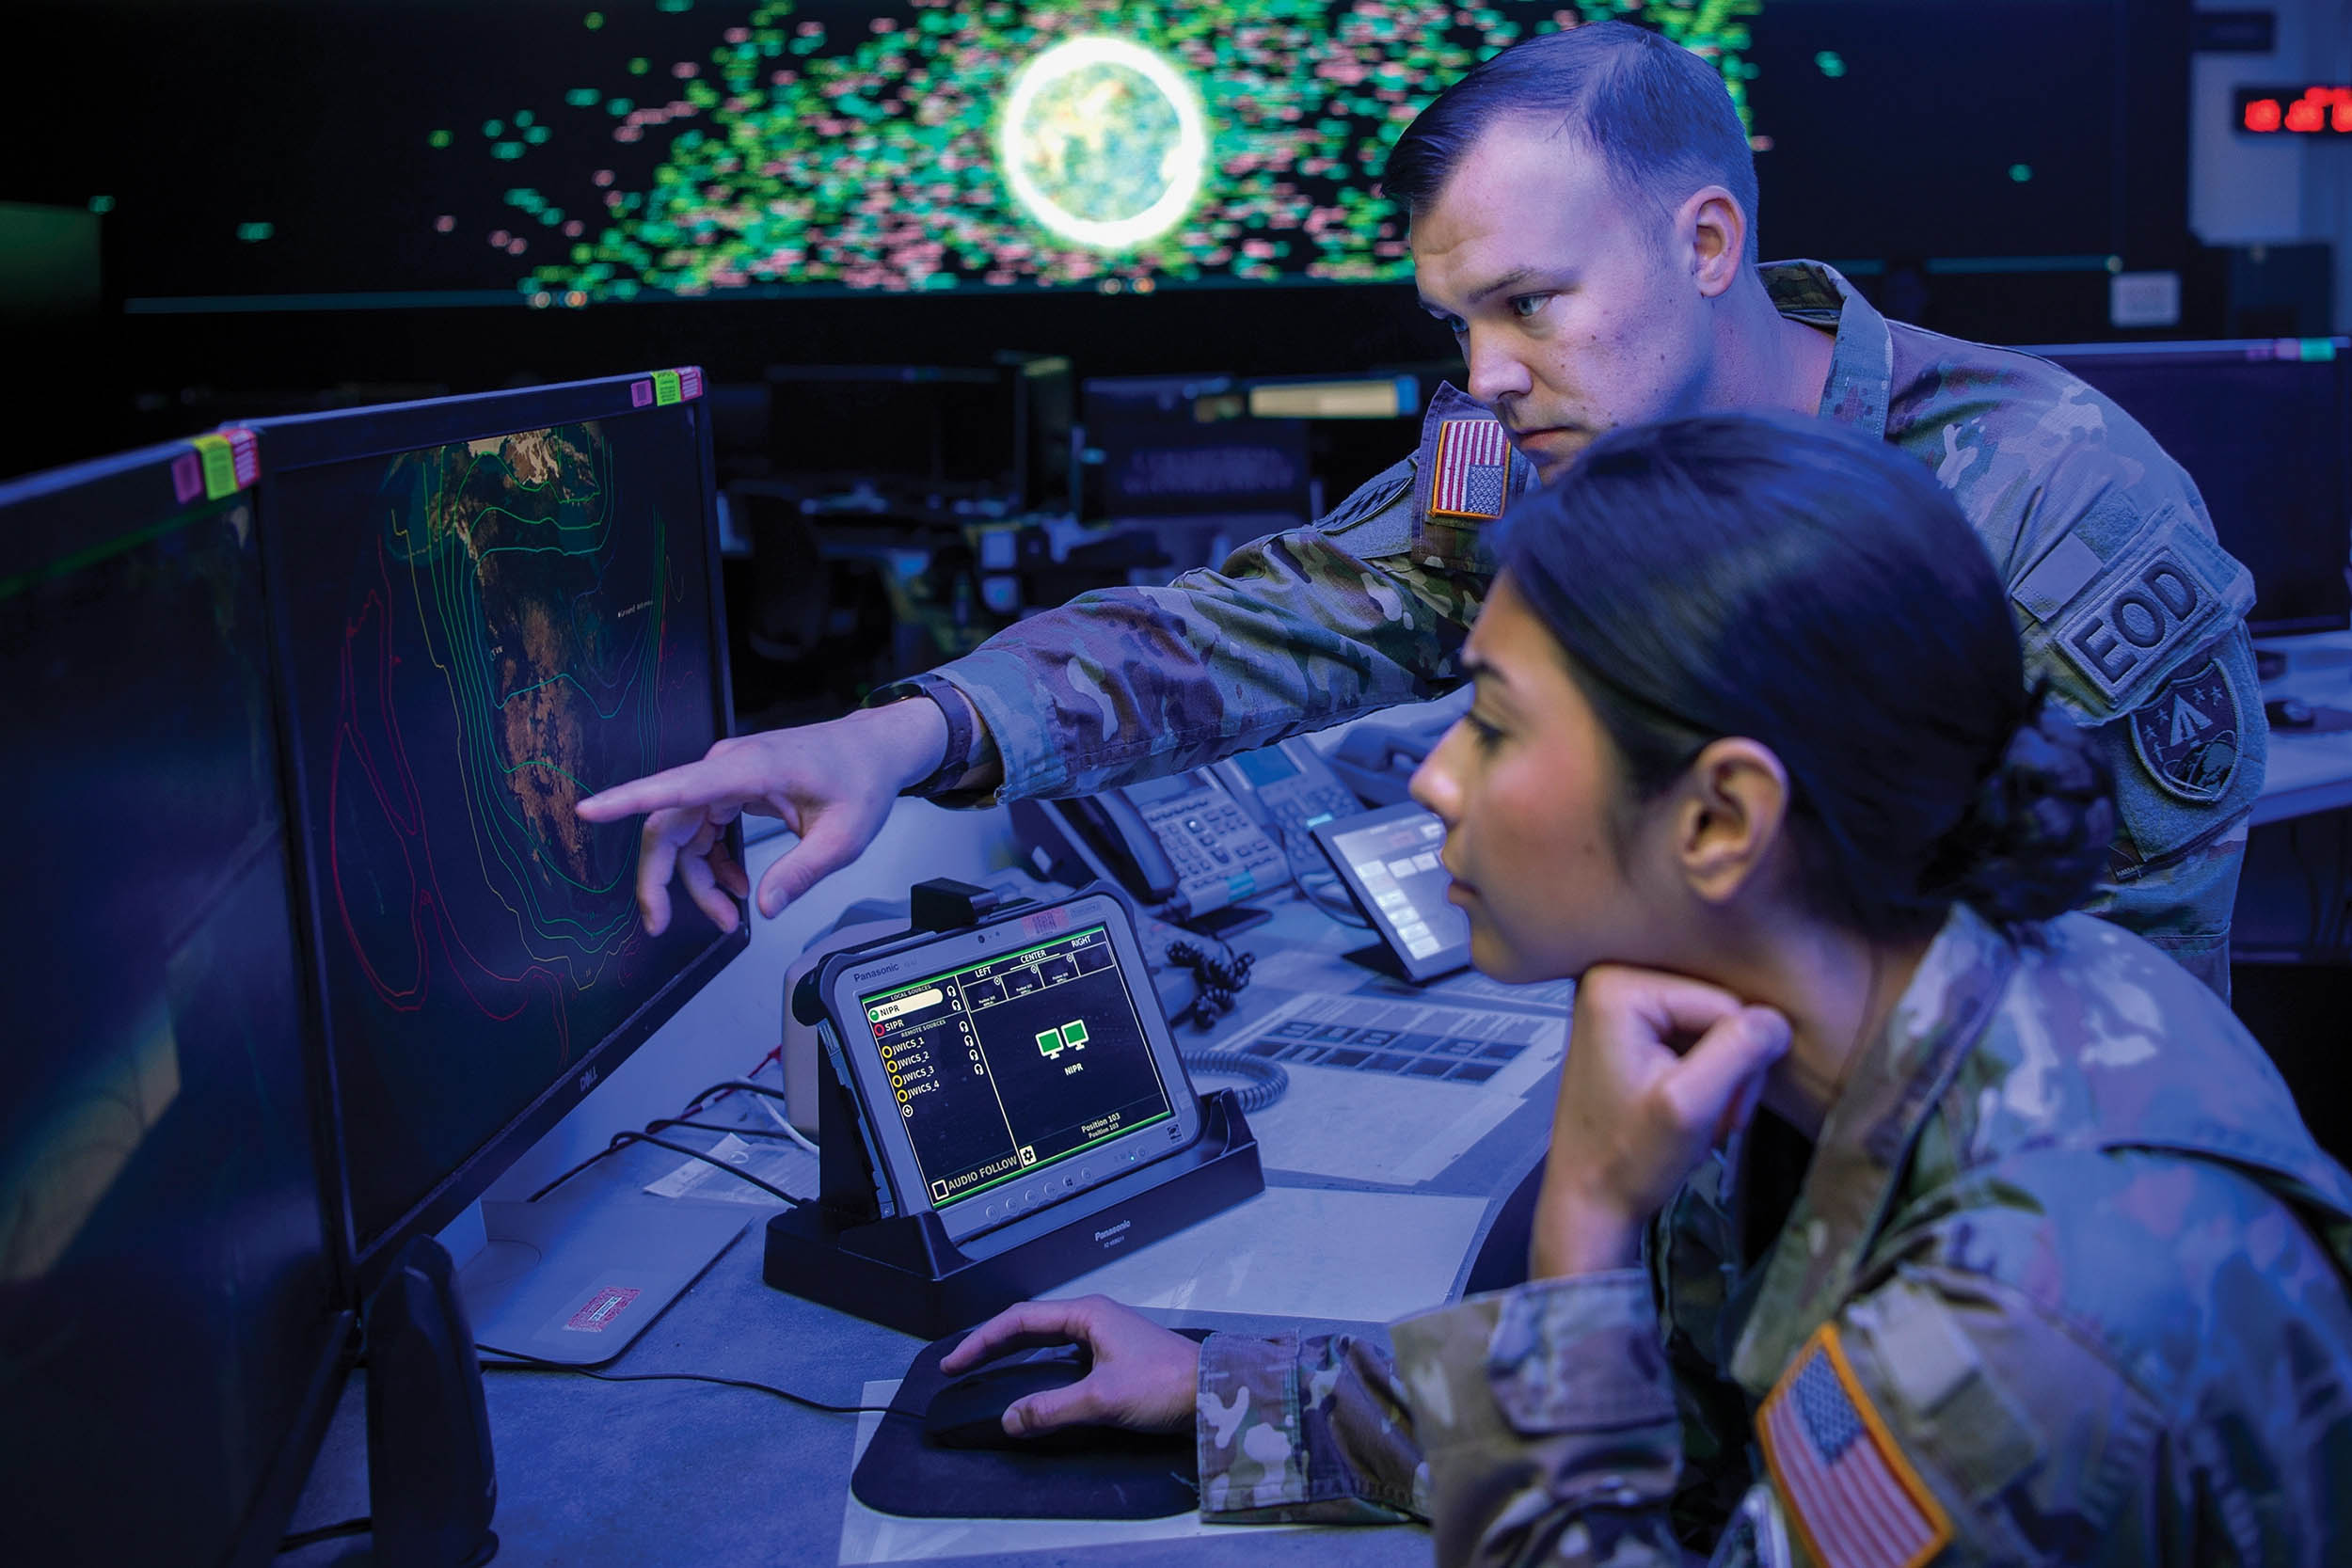 Army Major Mitchell Daugherty, mission director for National Space Defense Center, works with Space Force 1st Lieutenant Tia Scoggan, weapons and tactics section chief for 18th Space Defense Squadron Det. 1, at Schriever Space Force Base, Colorado, October 5, 2022 (U.S. Space Force/Tiana Williams)